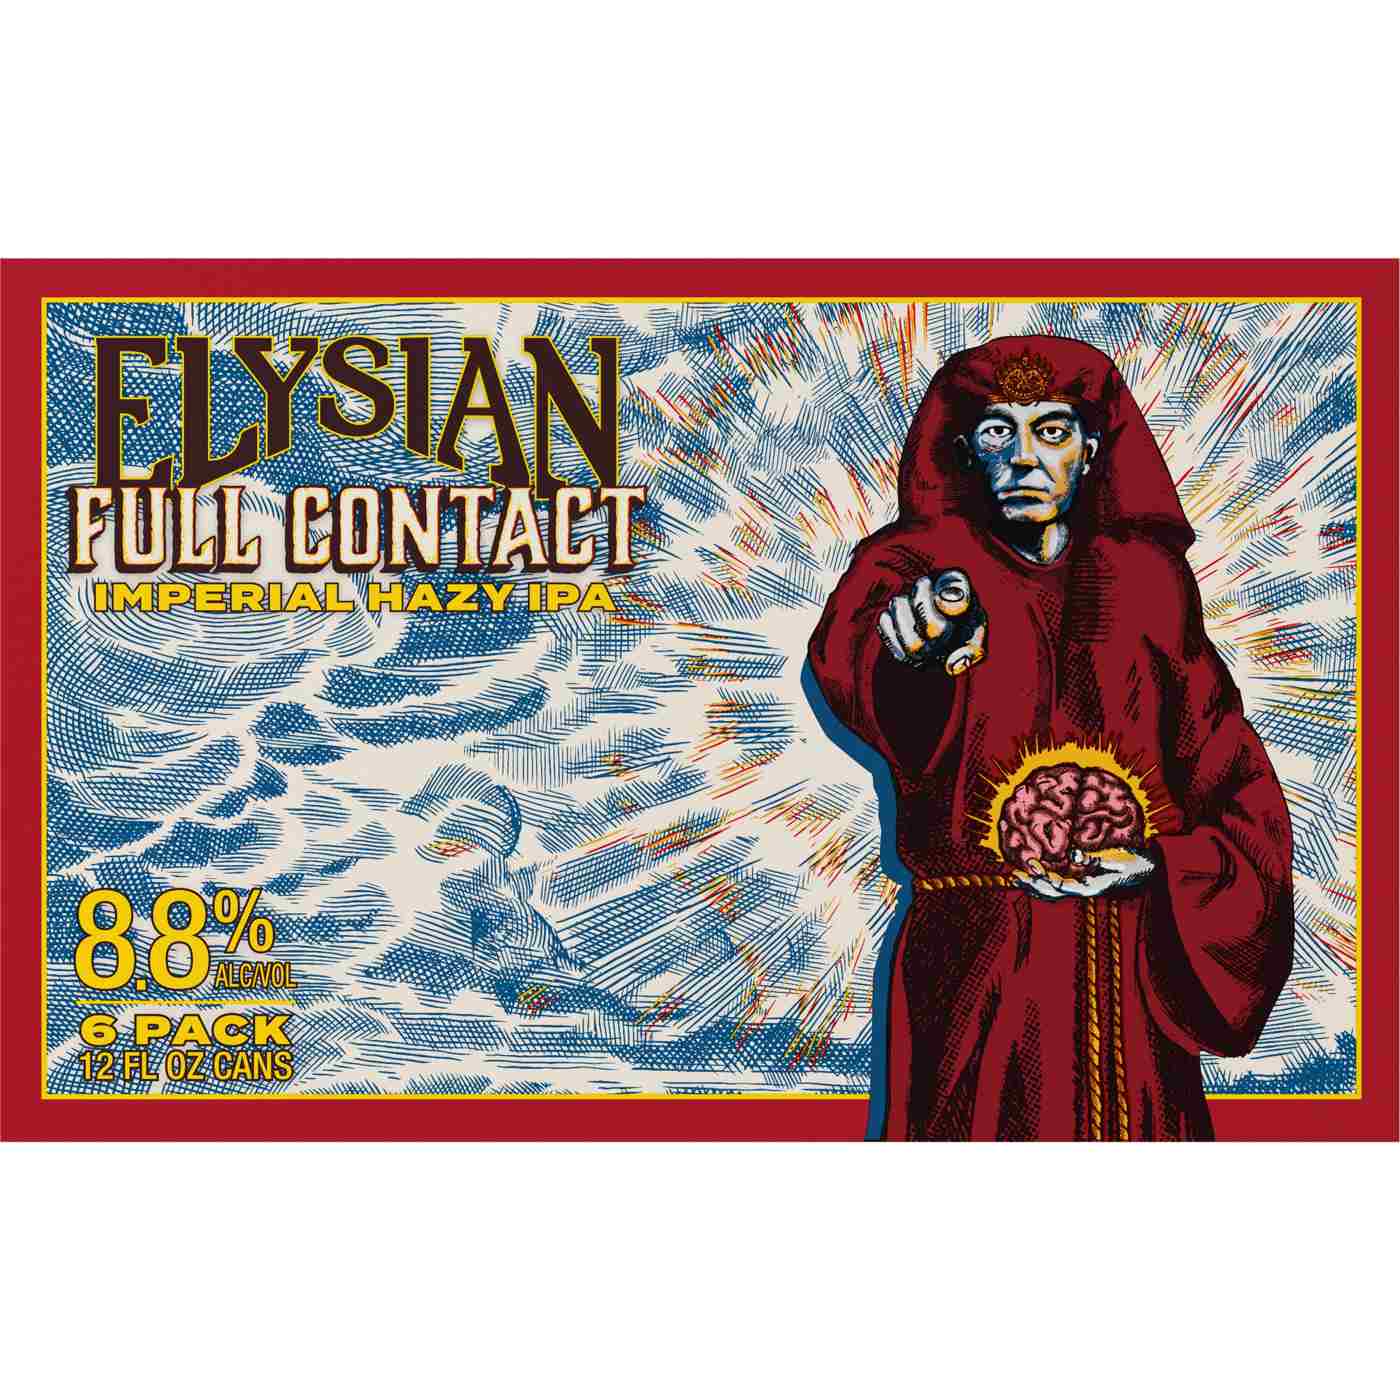 Elysian Full Contact Imperial Hazy IPA Beer 12 oz Cans; image 2 of 2